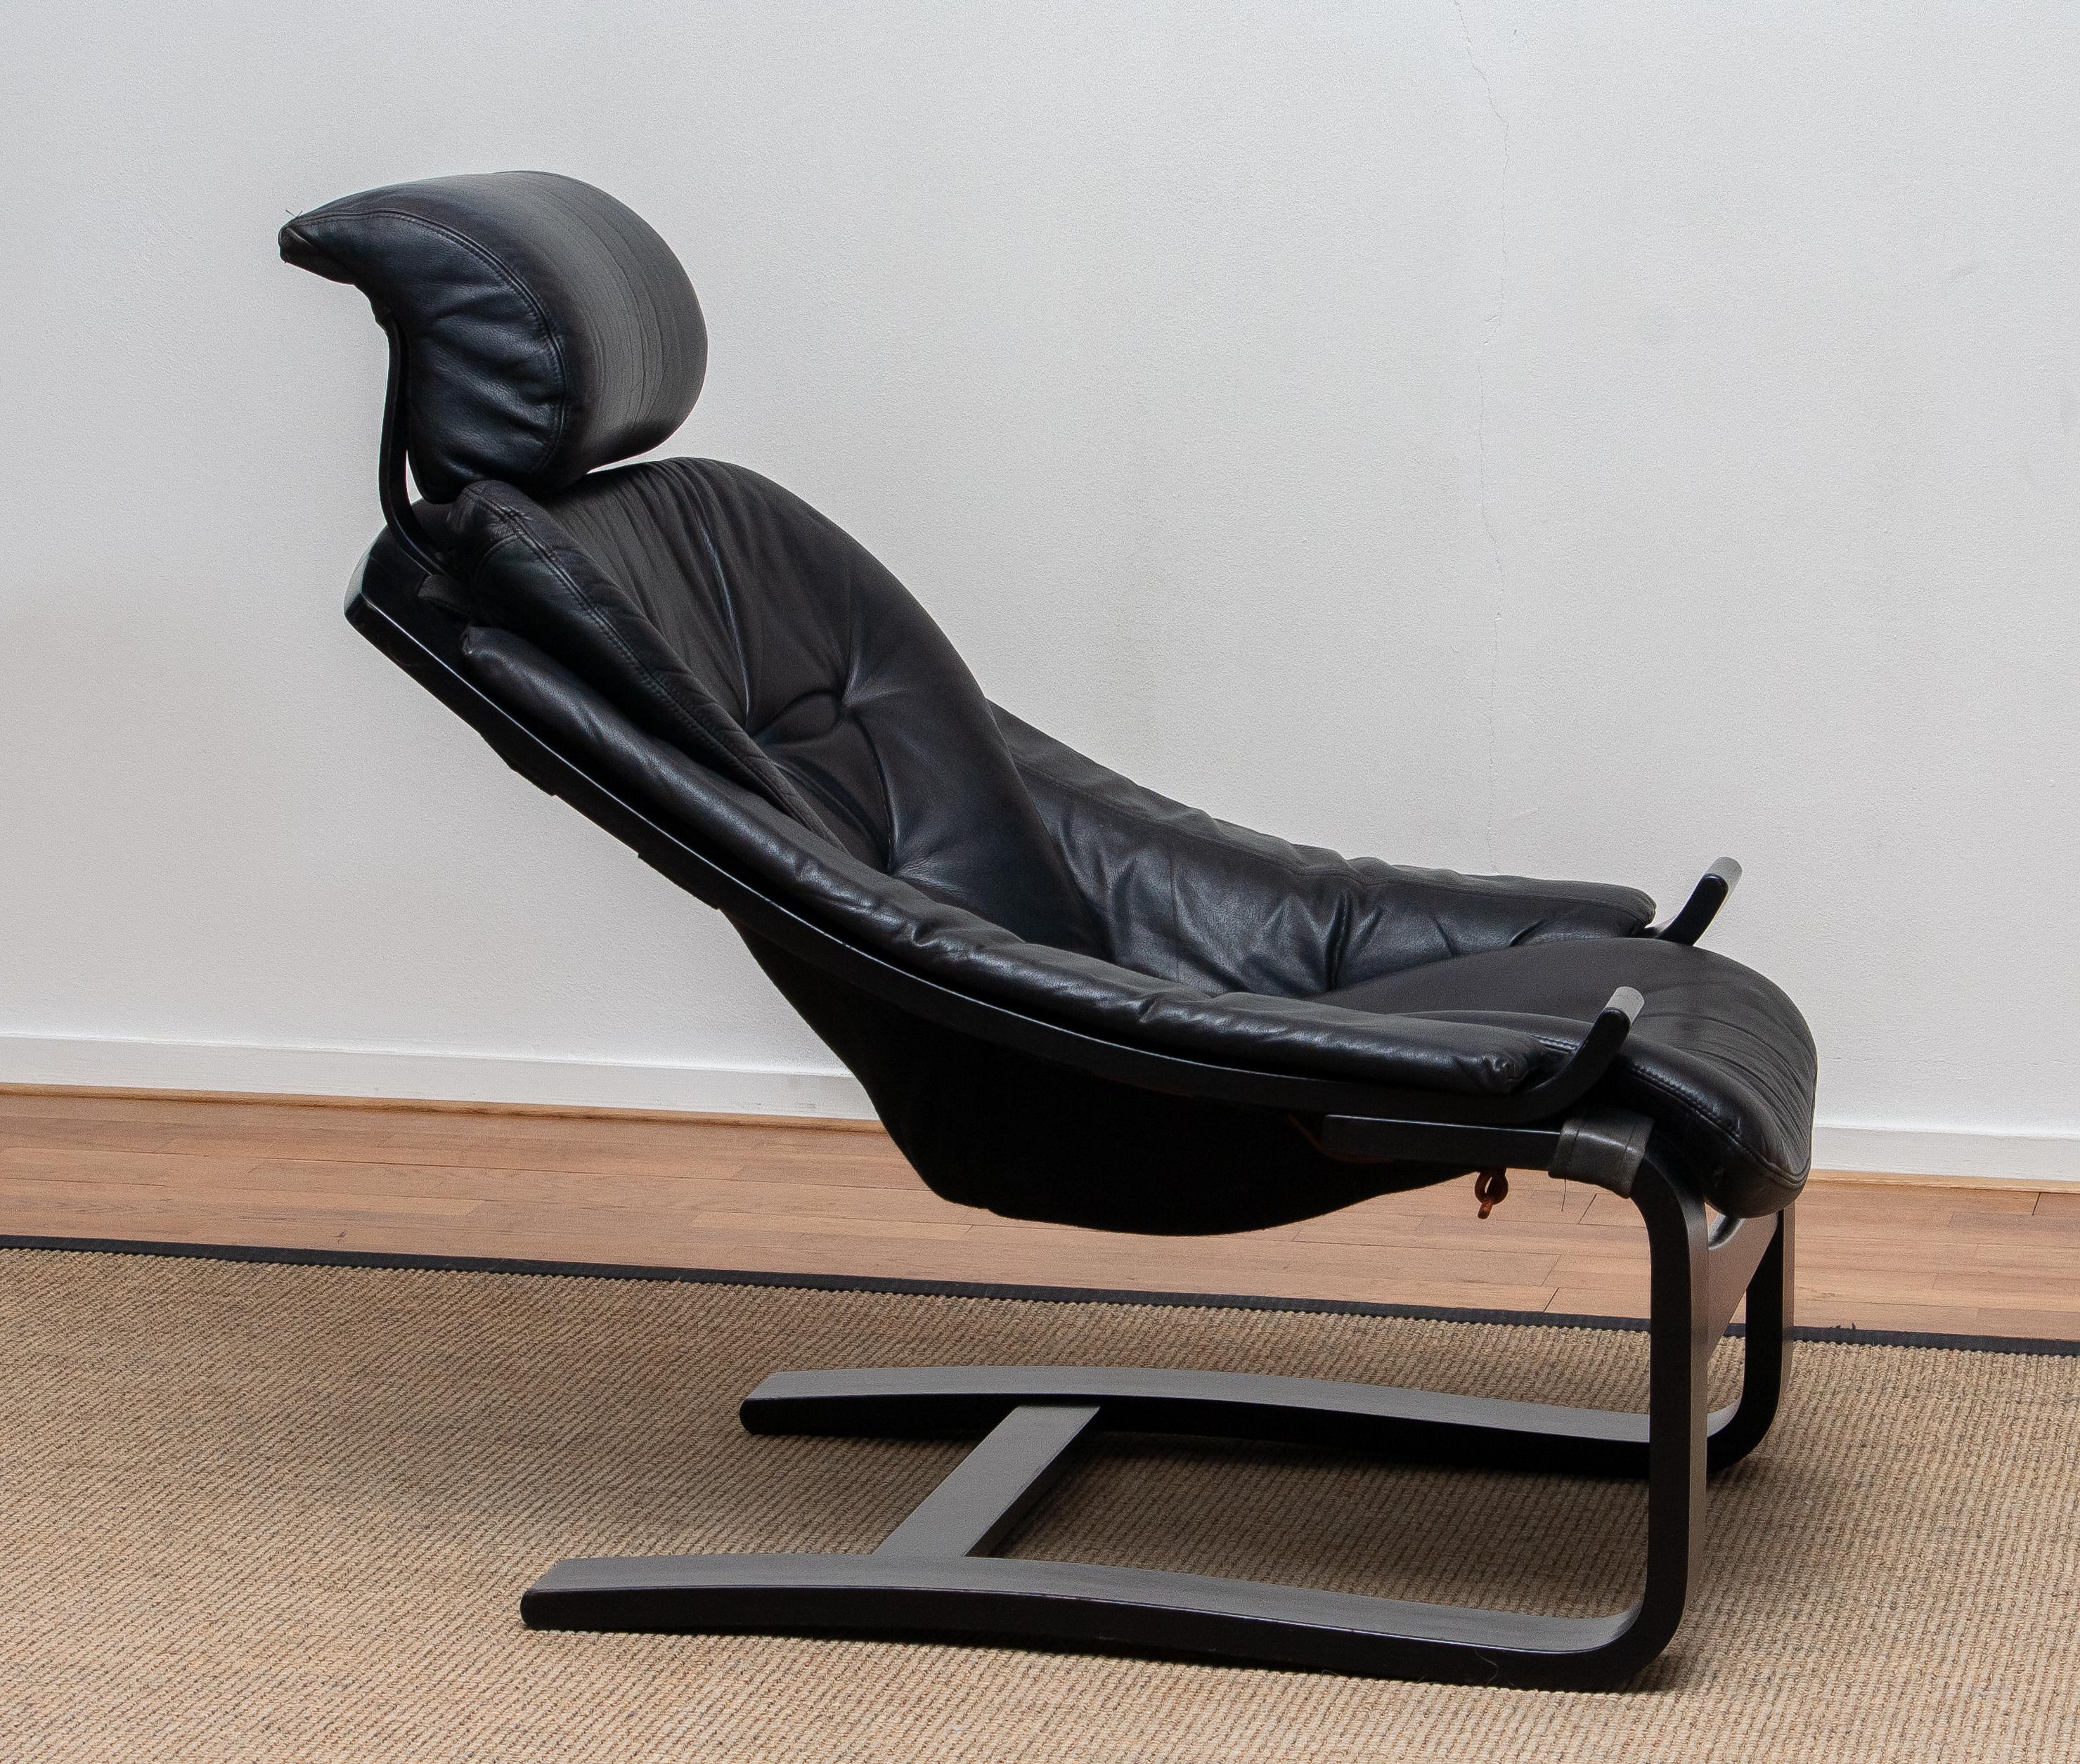 Late 20th Century 1970s, Black 'Kroken' Lounge Chair By Ake Fribytter for Nelo Sweden In Leather.